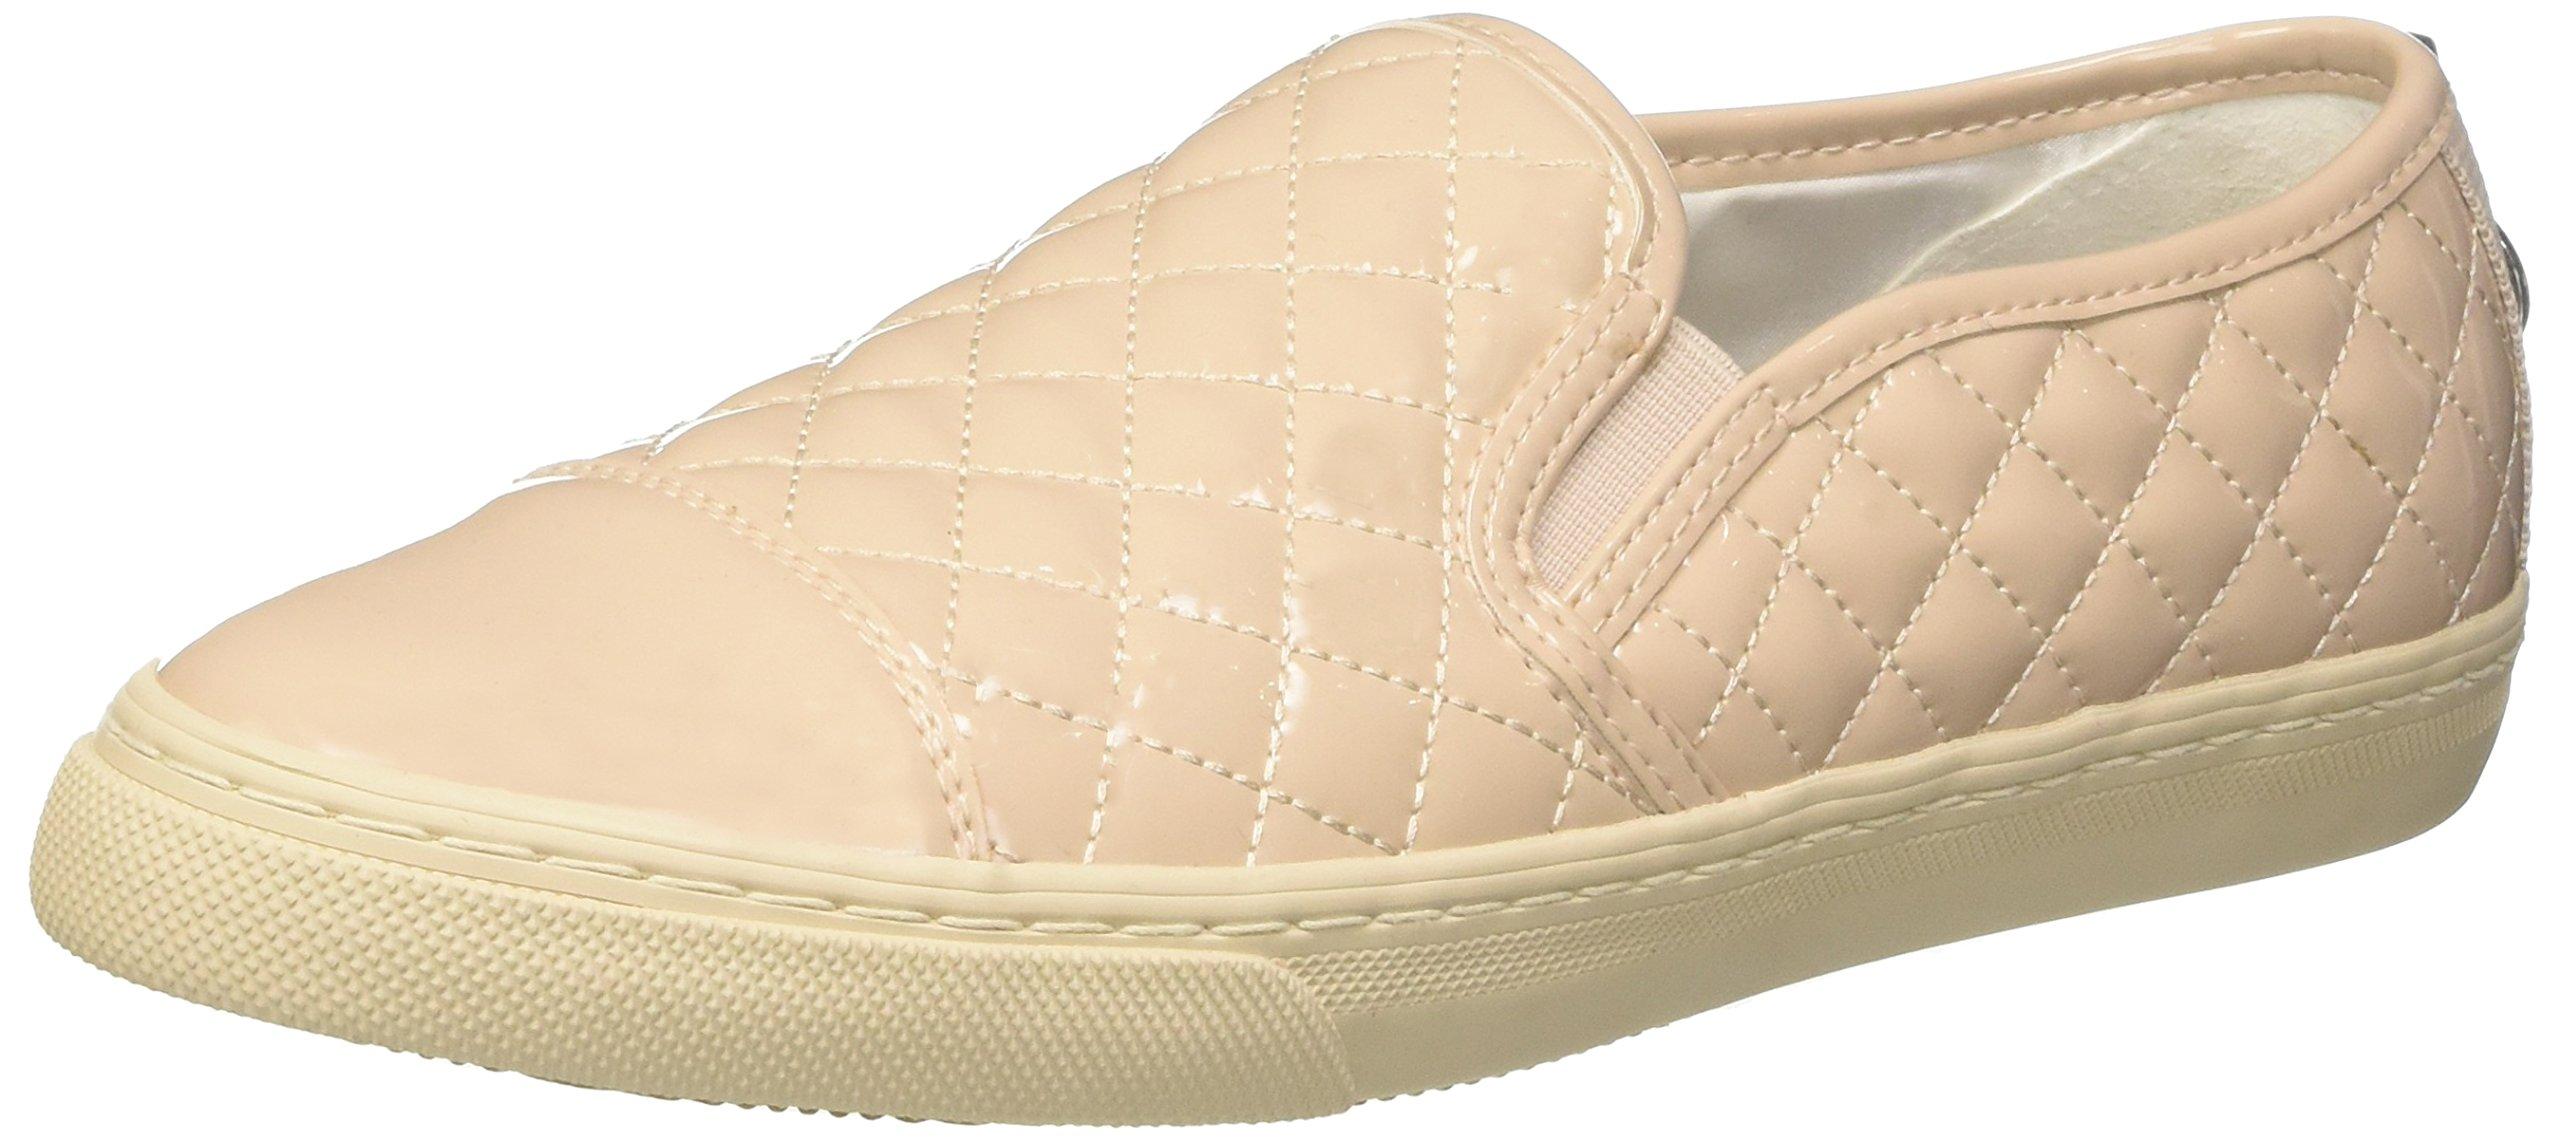 Geox W New Club 17 Fashion Sneaker in Natural - Save 16% - Lyst